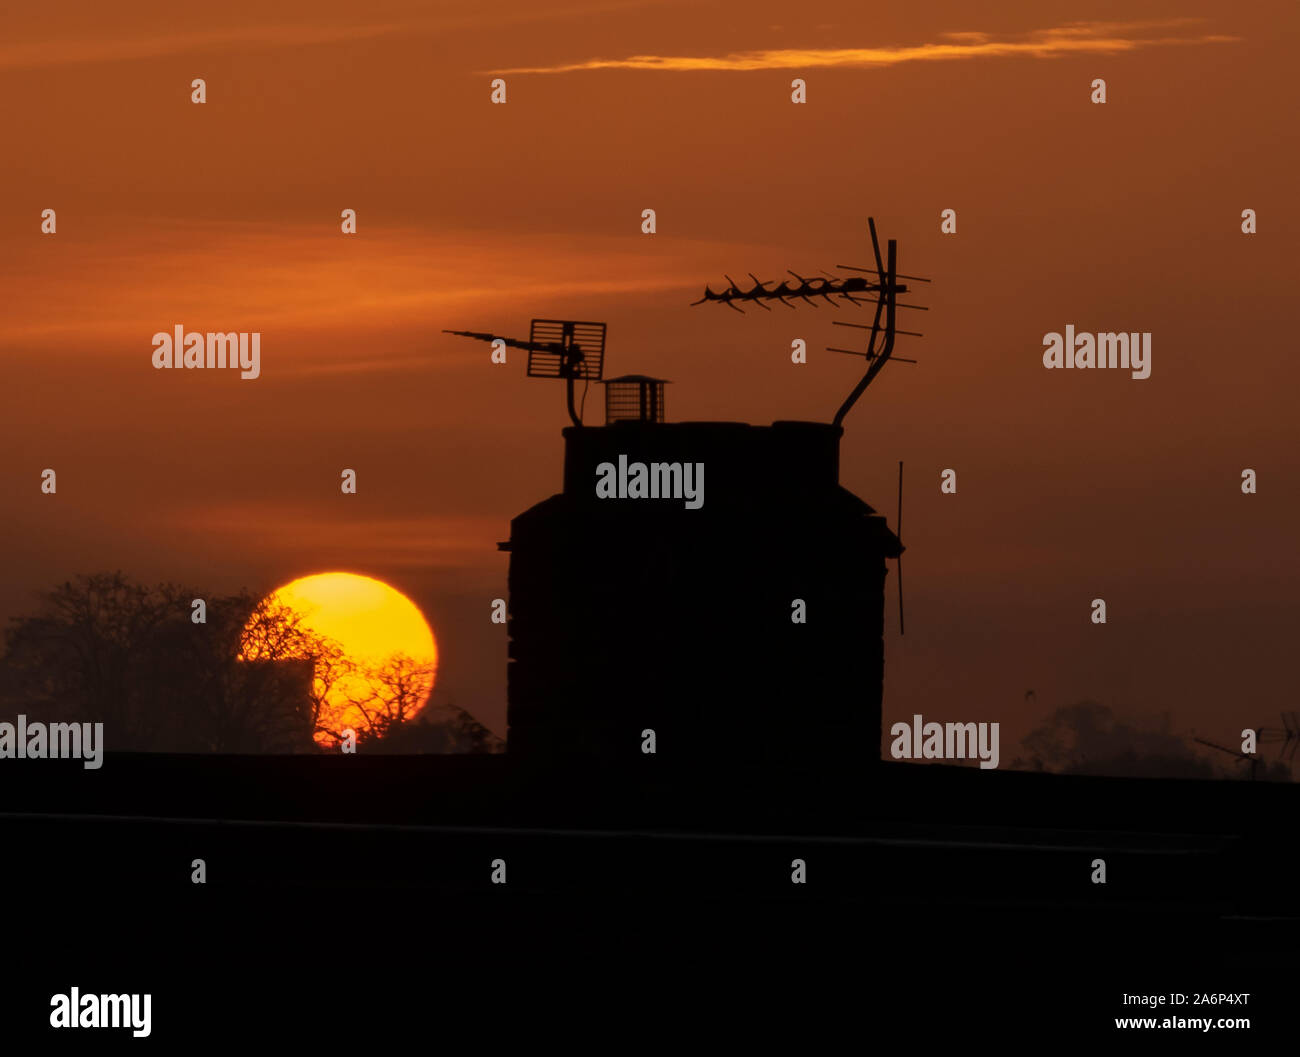 Wimbledon, London, UK. 28th October 2019. Orange sunrise in clear sky behind rooftops in south London after the first local Autumn night frost of 2019. Credit: Malcolm Park/Alamy Live News. Stock Photo